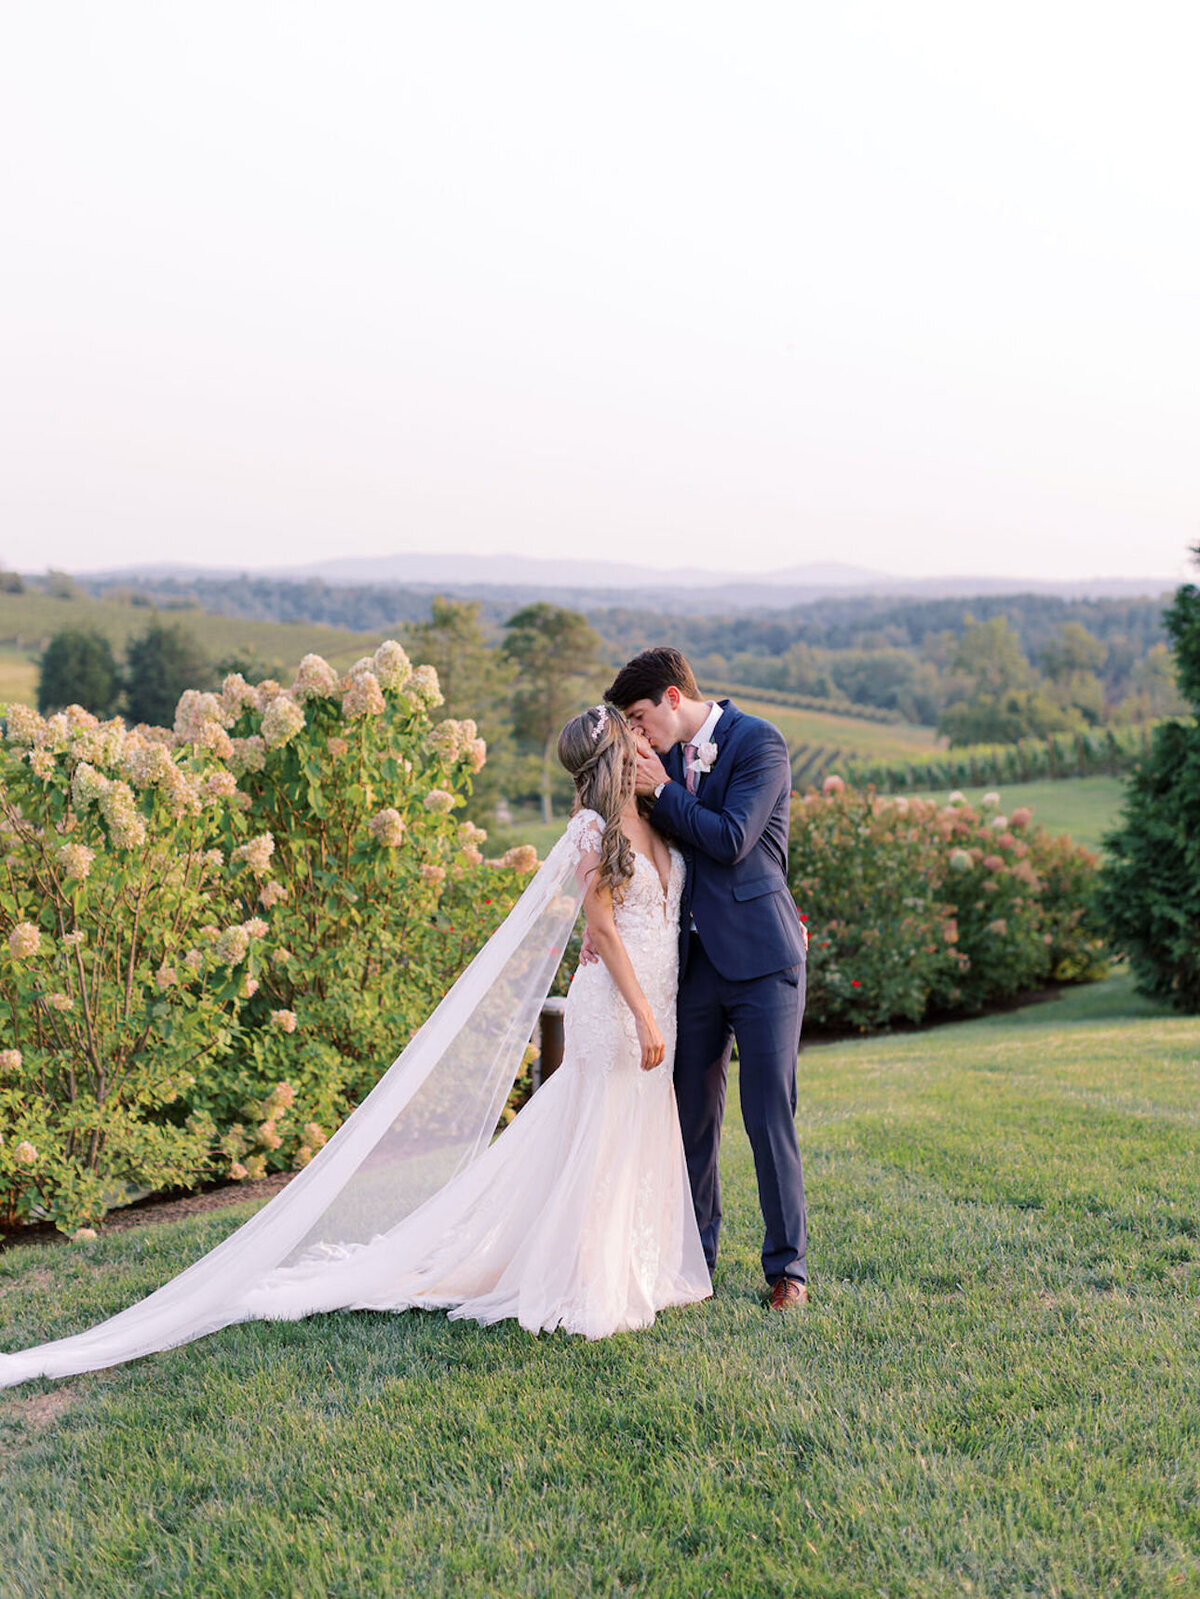 Megan-Brandon-Stone-Tower-Winery-Wedding-The-finer-points-event-planning-Kir2ben-photography00030